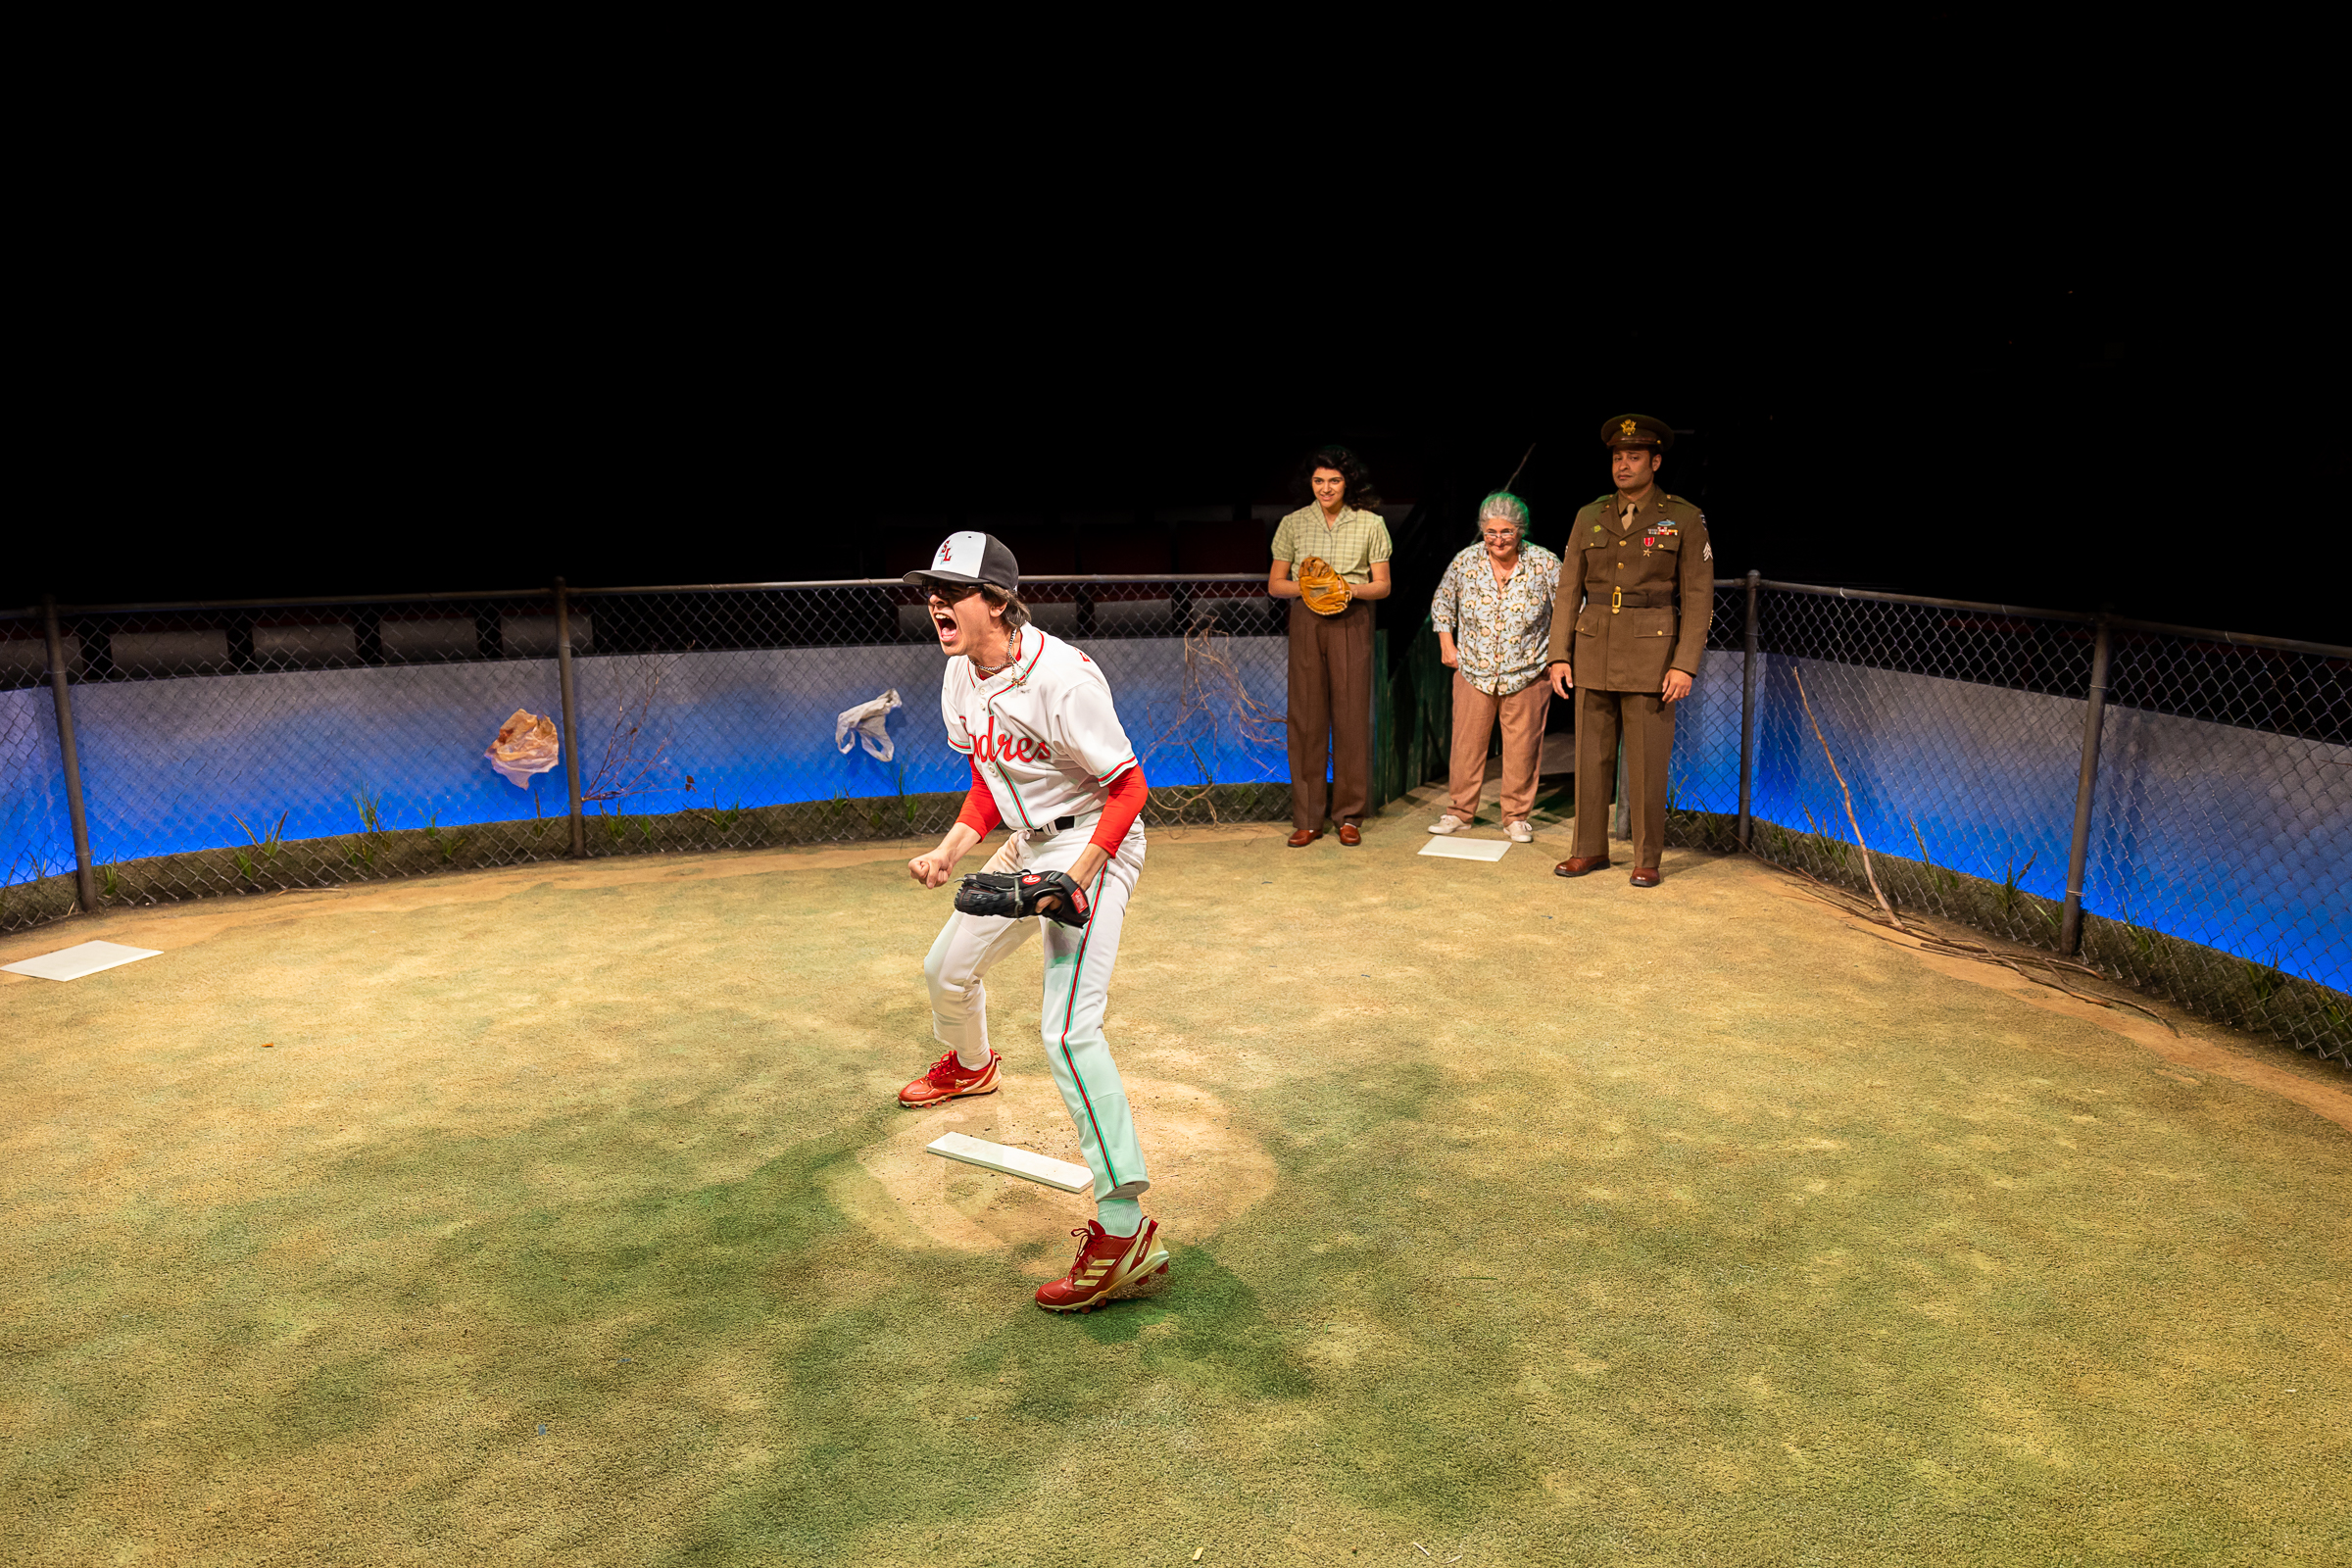 (from left) Diego Josef as Teo, Ana Nicolle Chavez as Paloma, Laura Crotte as Elí, and Cesar J. Rosado as Santiago in The Old Globe’s Under a Baseball Sky, February 11 – March 12, 2023. Photo by Rich Soublet II.